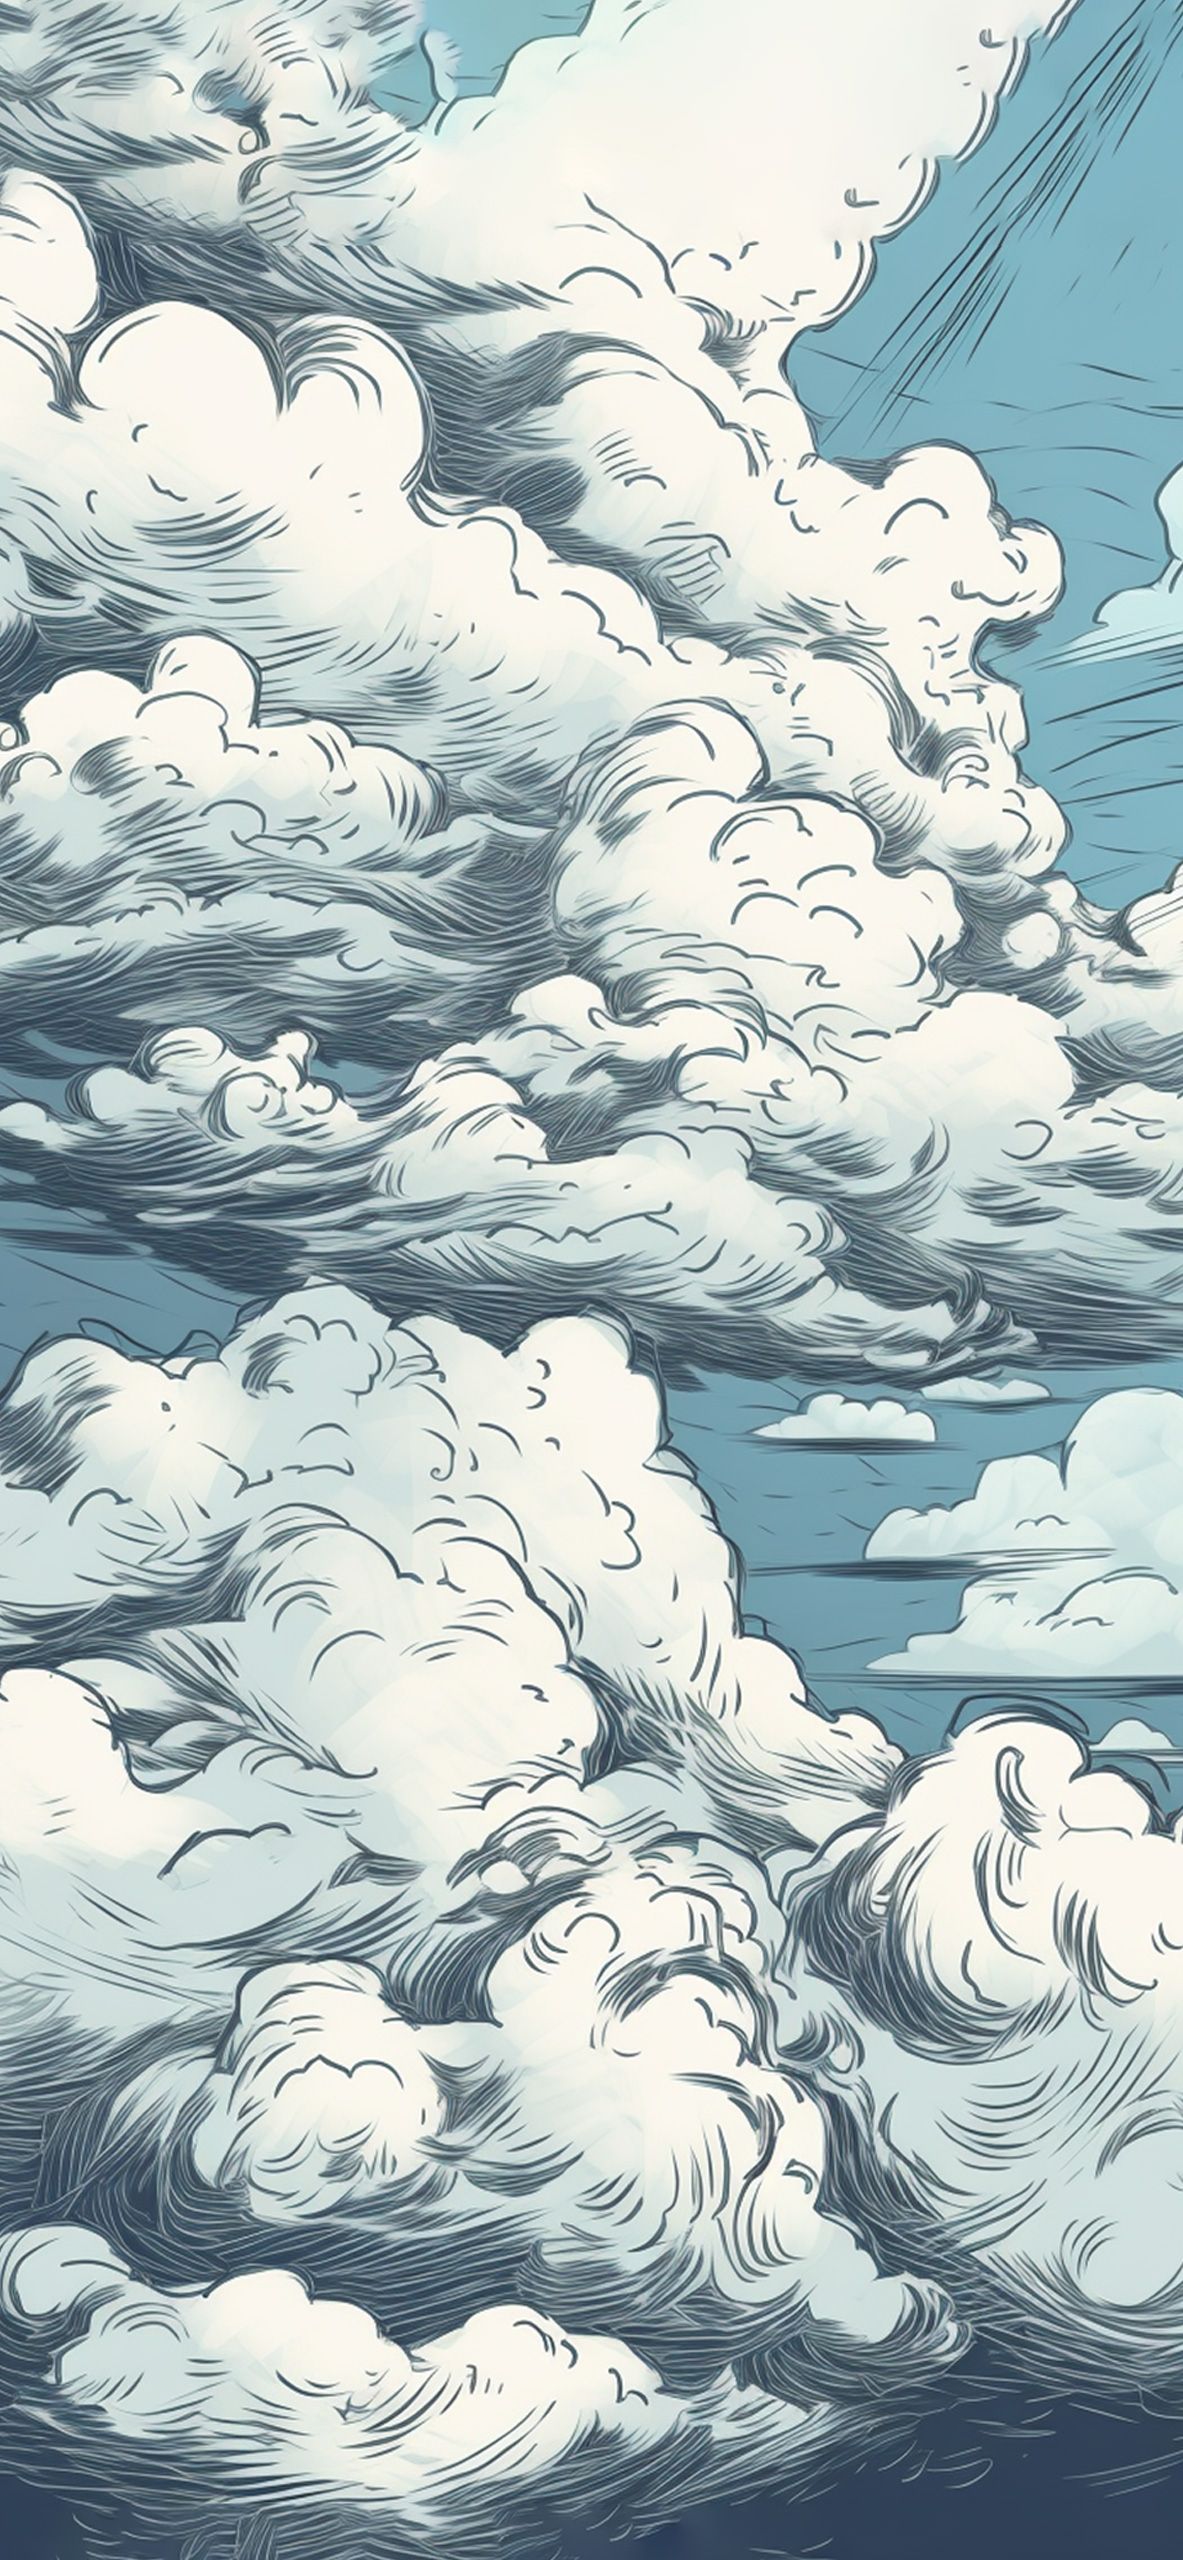 Clouds Sketch Wallpaper Aesthetic Wallpaper for iPhone